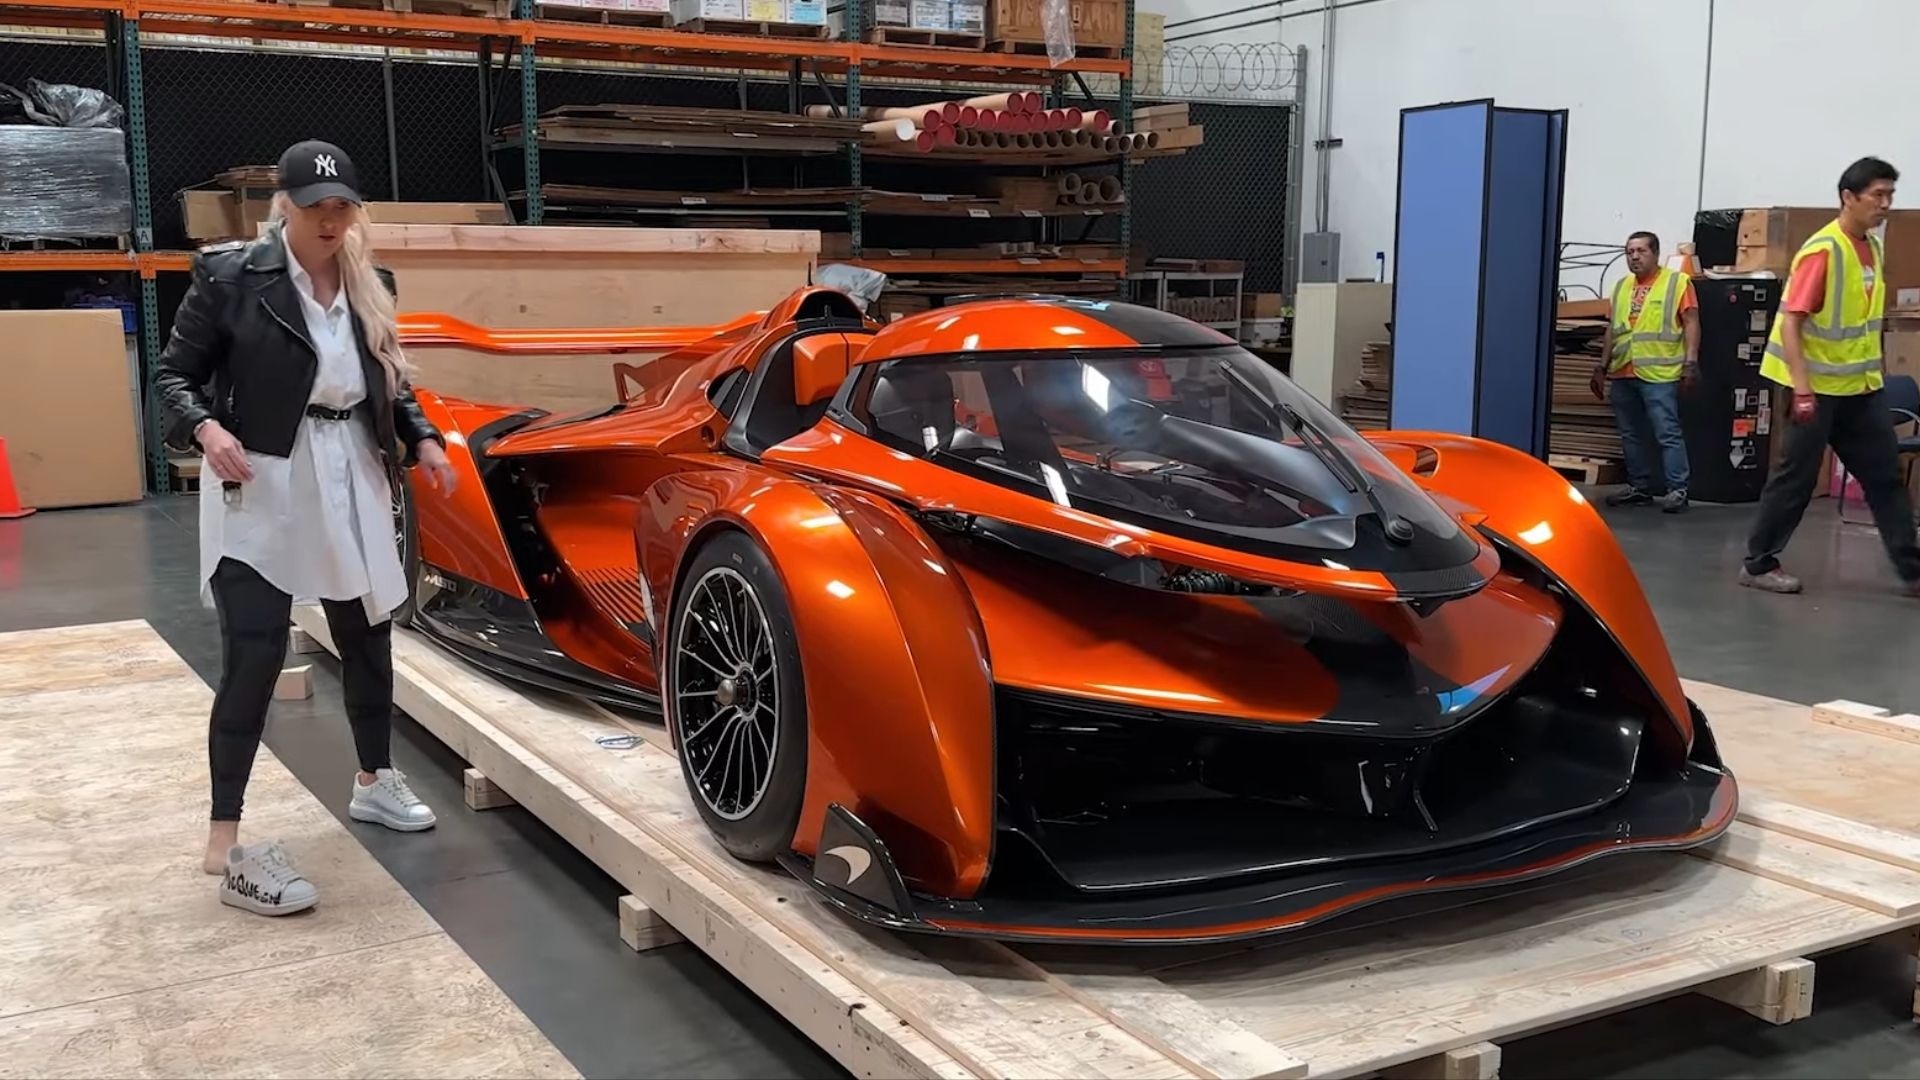 McLaren builds a real-life version of its Gran Turismo Sport concept car –  Supercar Blondie